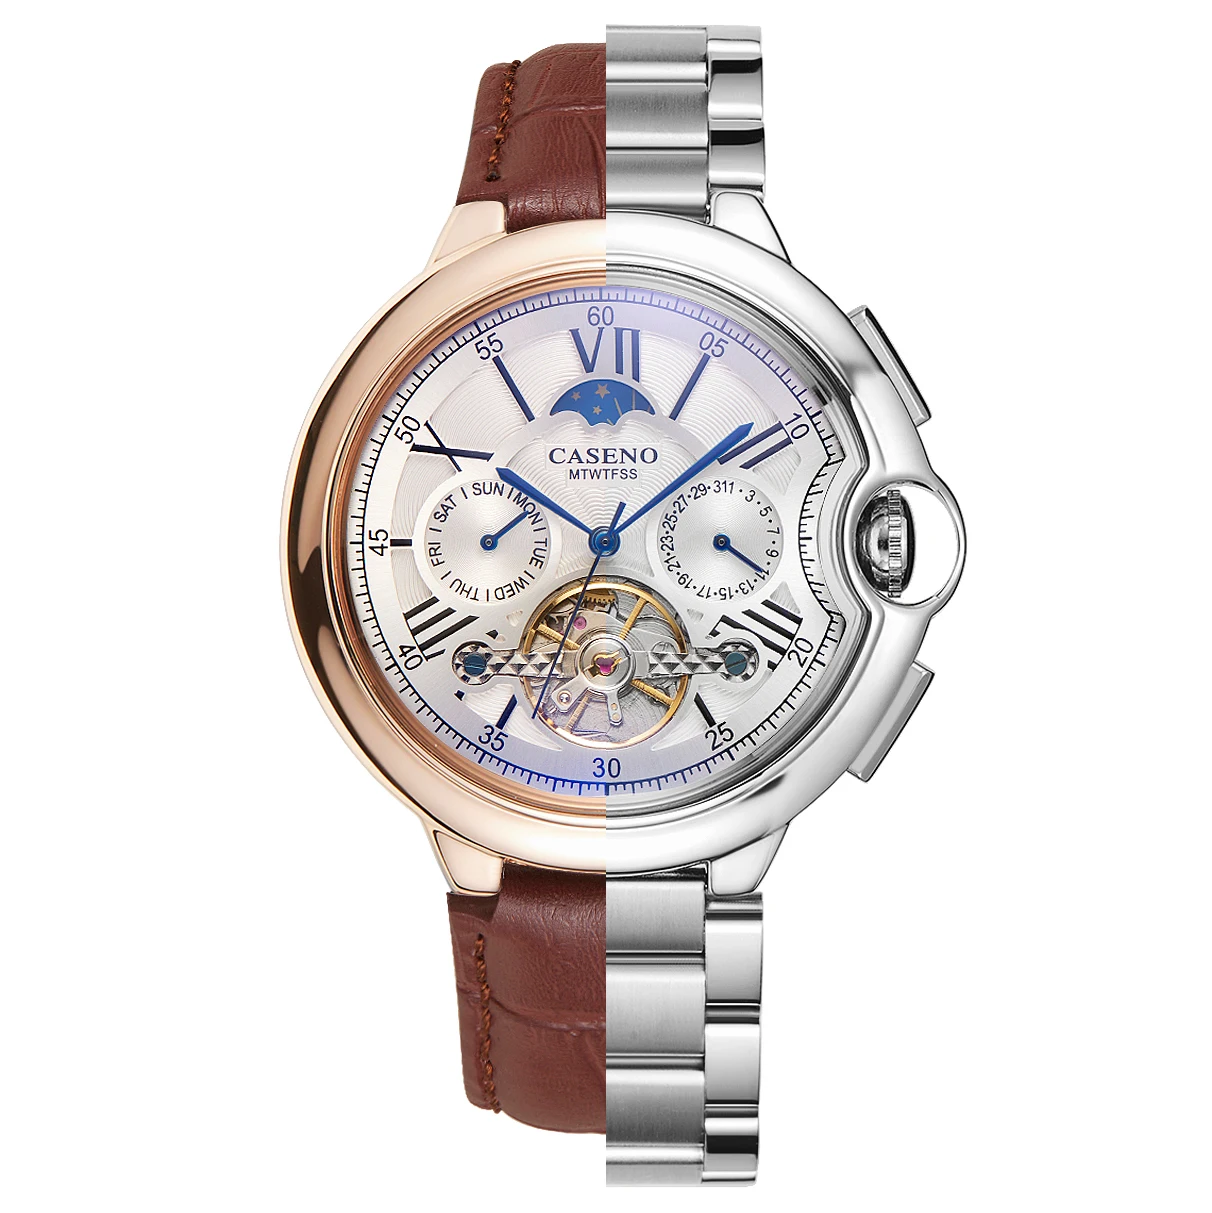 CASENO Tourbillon Automatic Mechanical Men Watch Wristwatch Stainless Steel Leather Strap Moon Phase Week Display Calendar enlarge